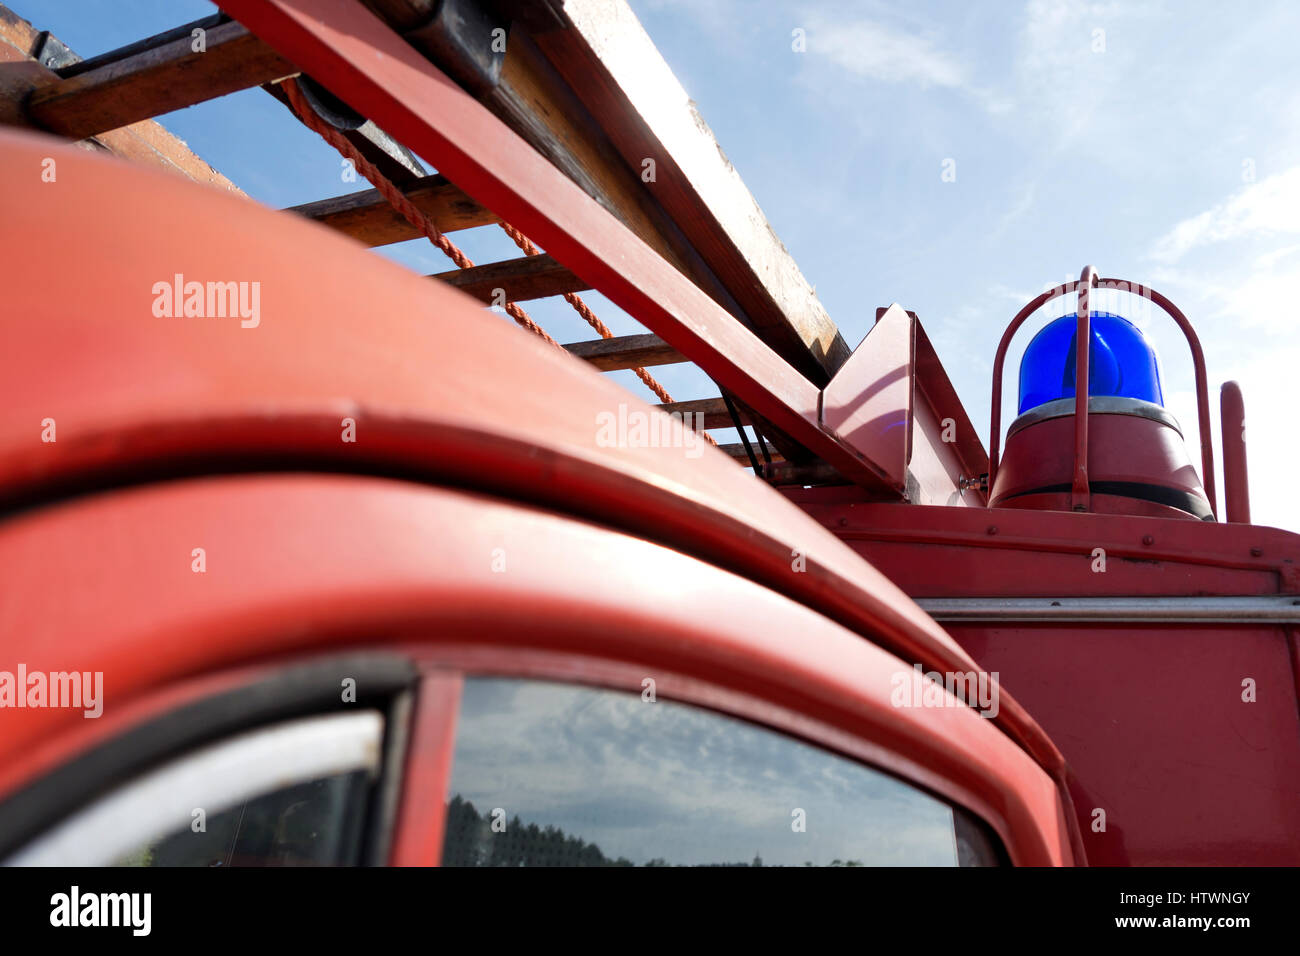 blue emergency vehicle lighting of a classic fire engine Stock Photo